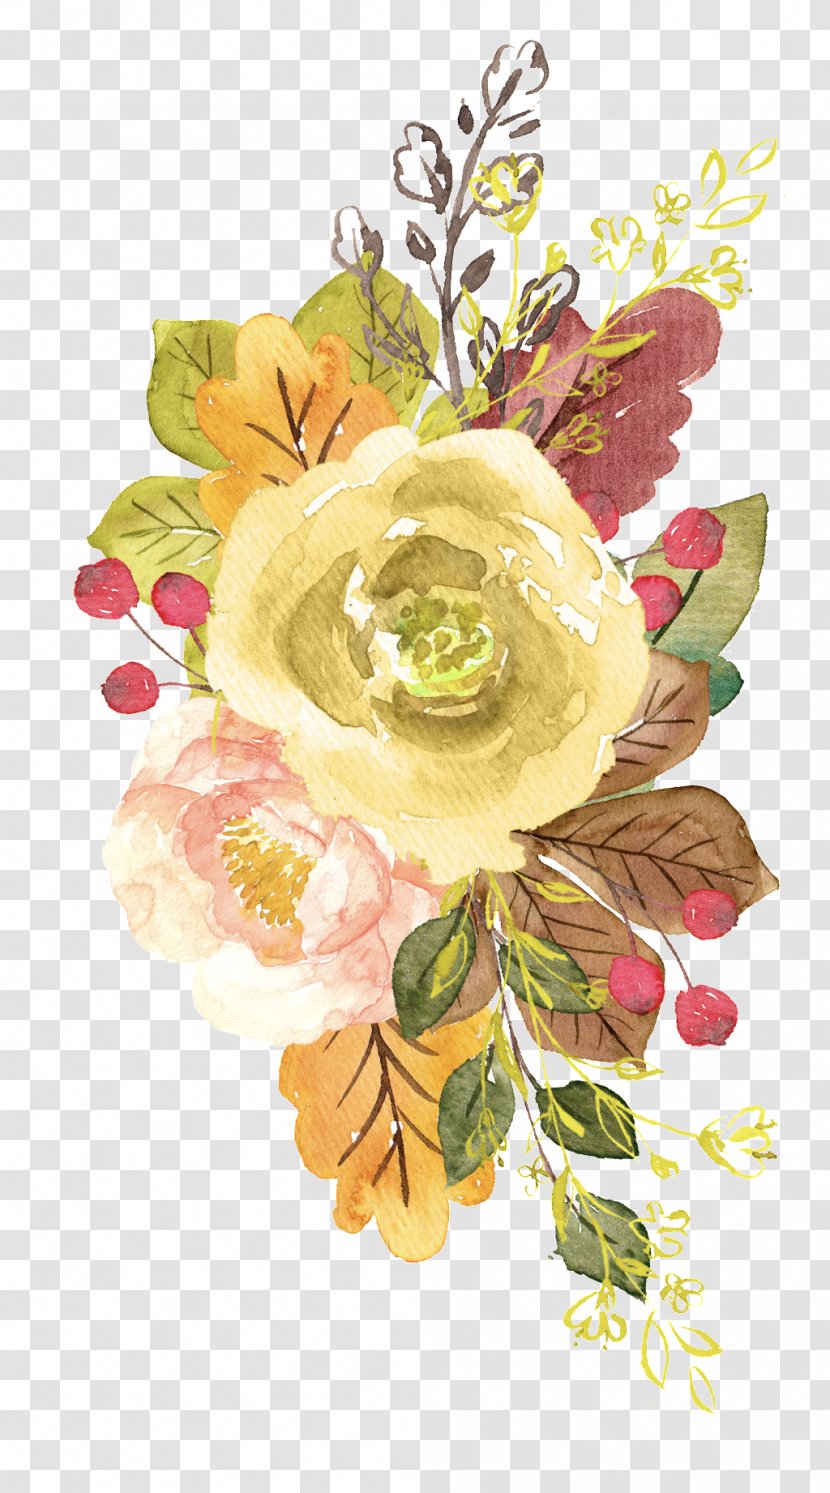 Watercolor Painting Illustration Watercolor: Flowers Image - Flower - Material Transparent PNG